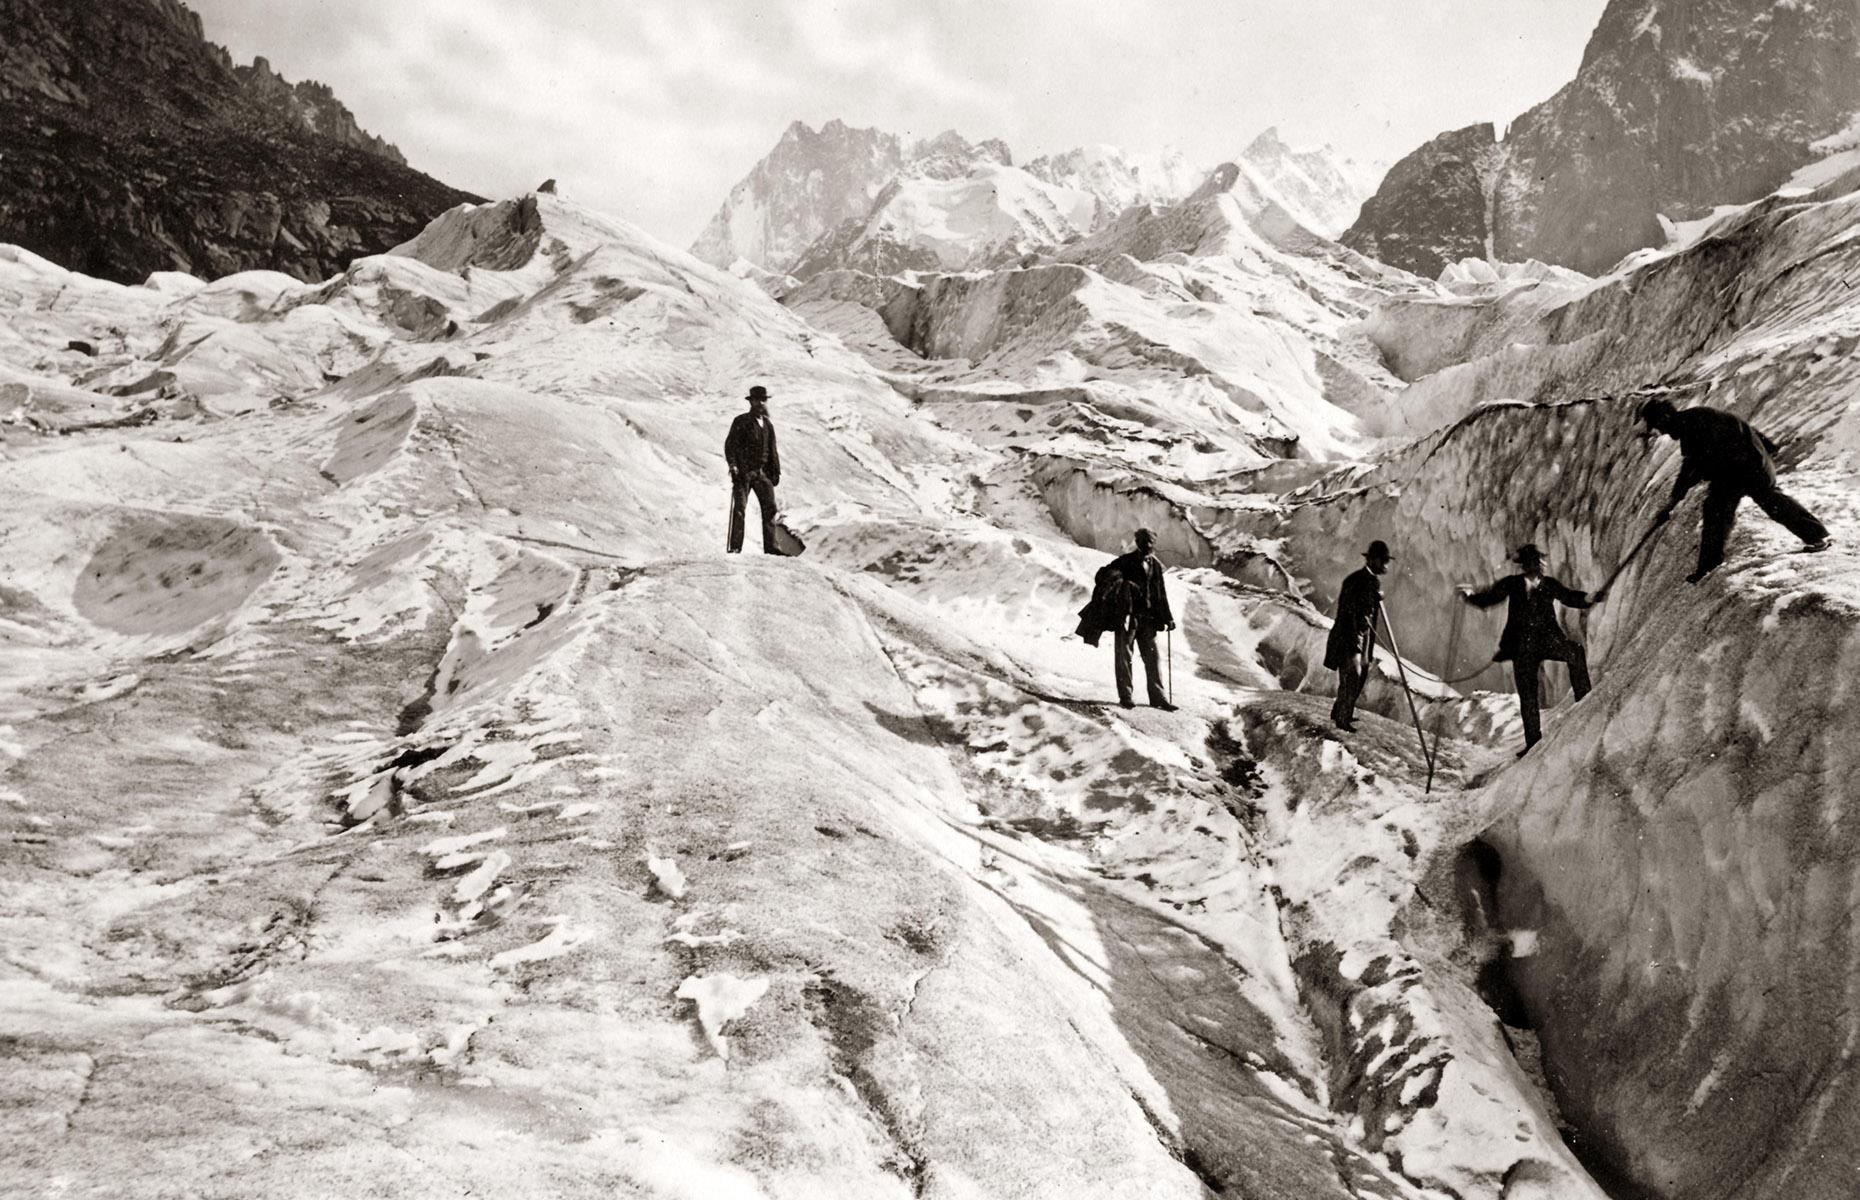 <p>The Aletsch Glacier in Switzerland’s Bernese Alps is the mightiest mass of ice in Europe. Covering a staggering 66 square miles, it has always attracted tourists, including these smartly dressed chaps in 1870. Sadly, the glacier has lost almost two miles of its length since this photo was taken, and by 2100, scientists' predictions suggest it could shrink by a further eight miles.</p>